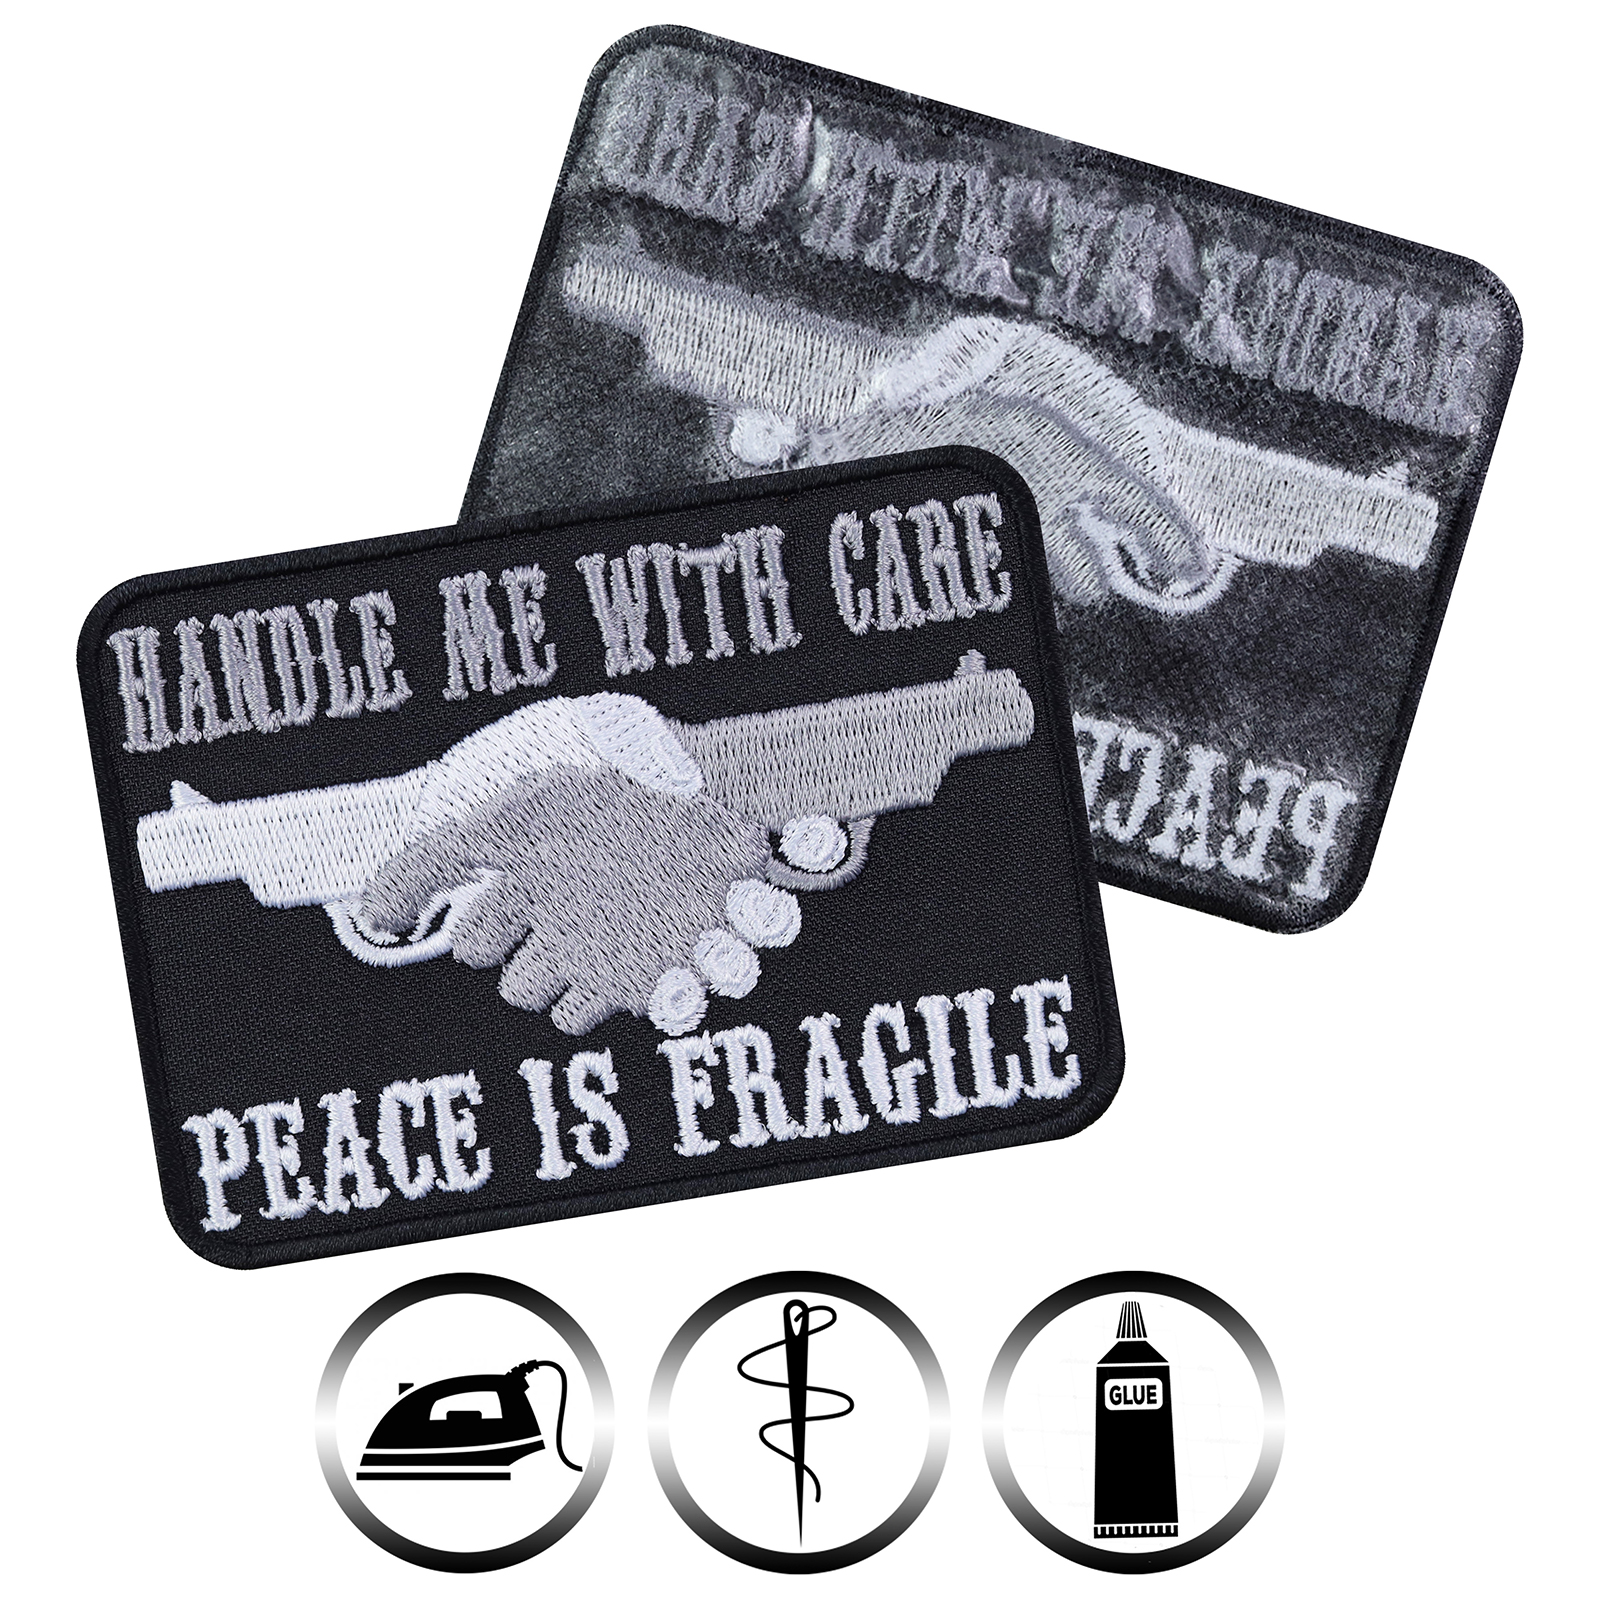 Handle me with care, peace is fragile - Patch